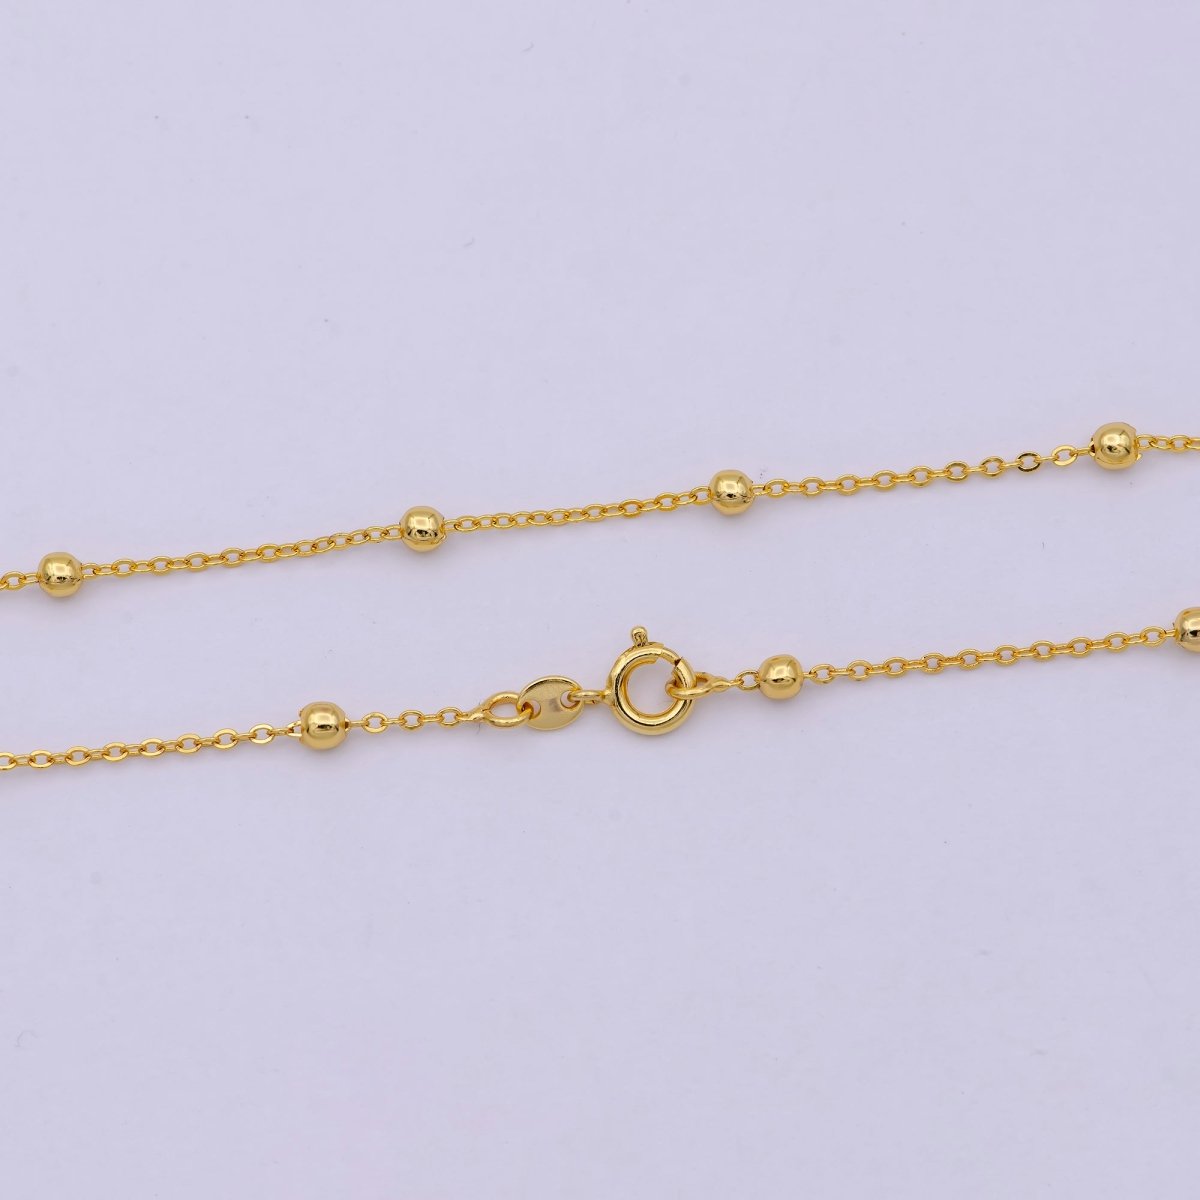 24K Gold Filled Satellite Chain Dainty Gold Ball Chain 18 Inches Ready To Wear Necklace w/ Lobster Clasps | WA-527 WA-528 Clearance Pricing - DLUXCA